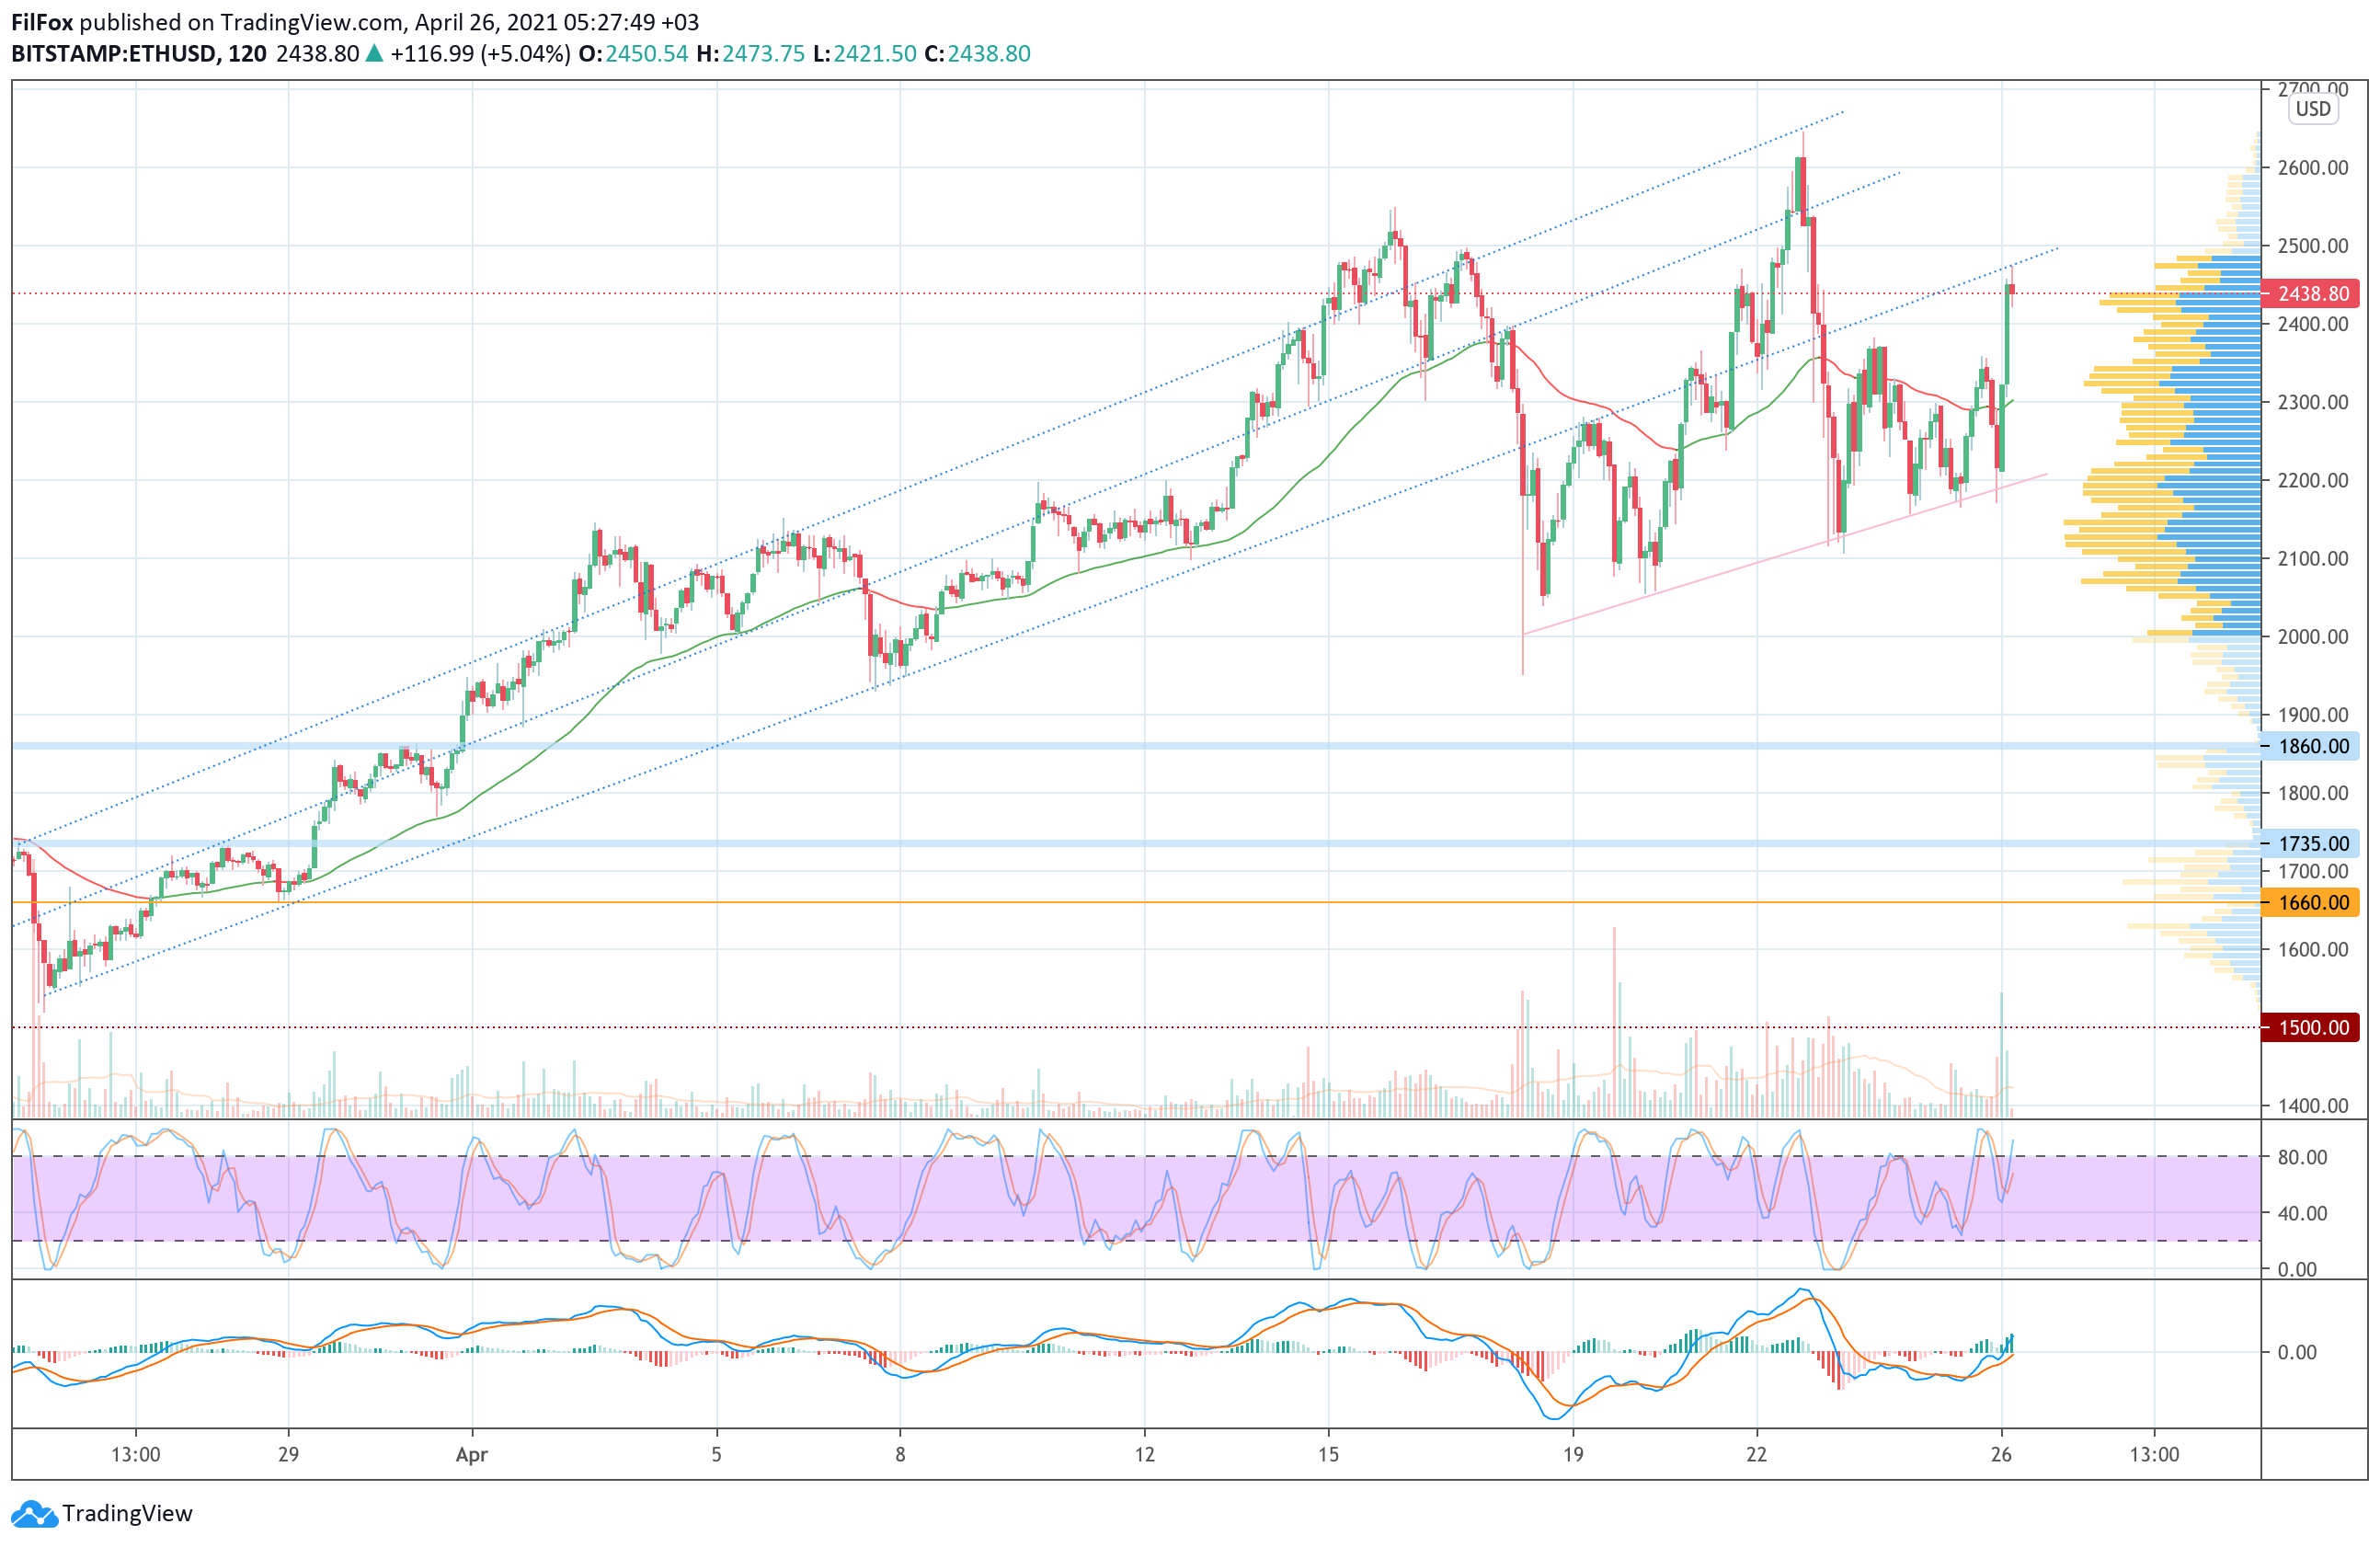 Analysis of the prices of Bitcoin, Ethereum, XRP for 04/26/2021